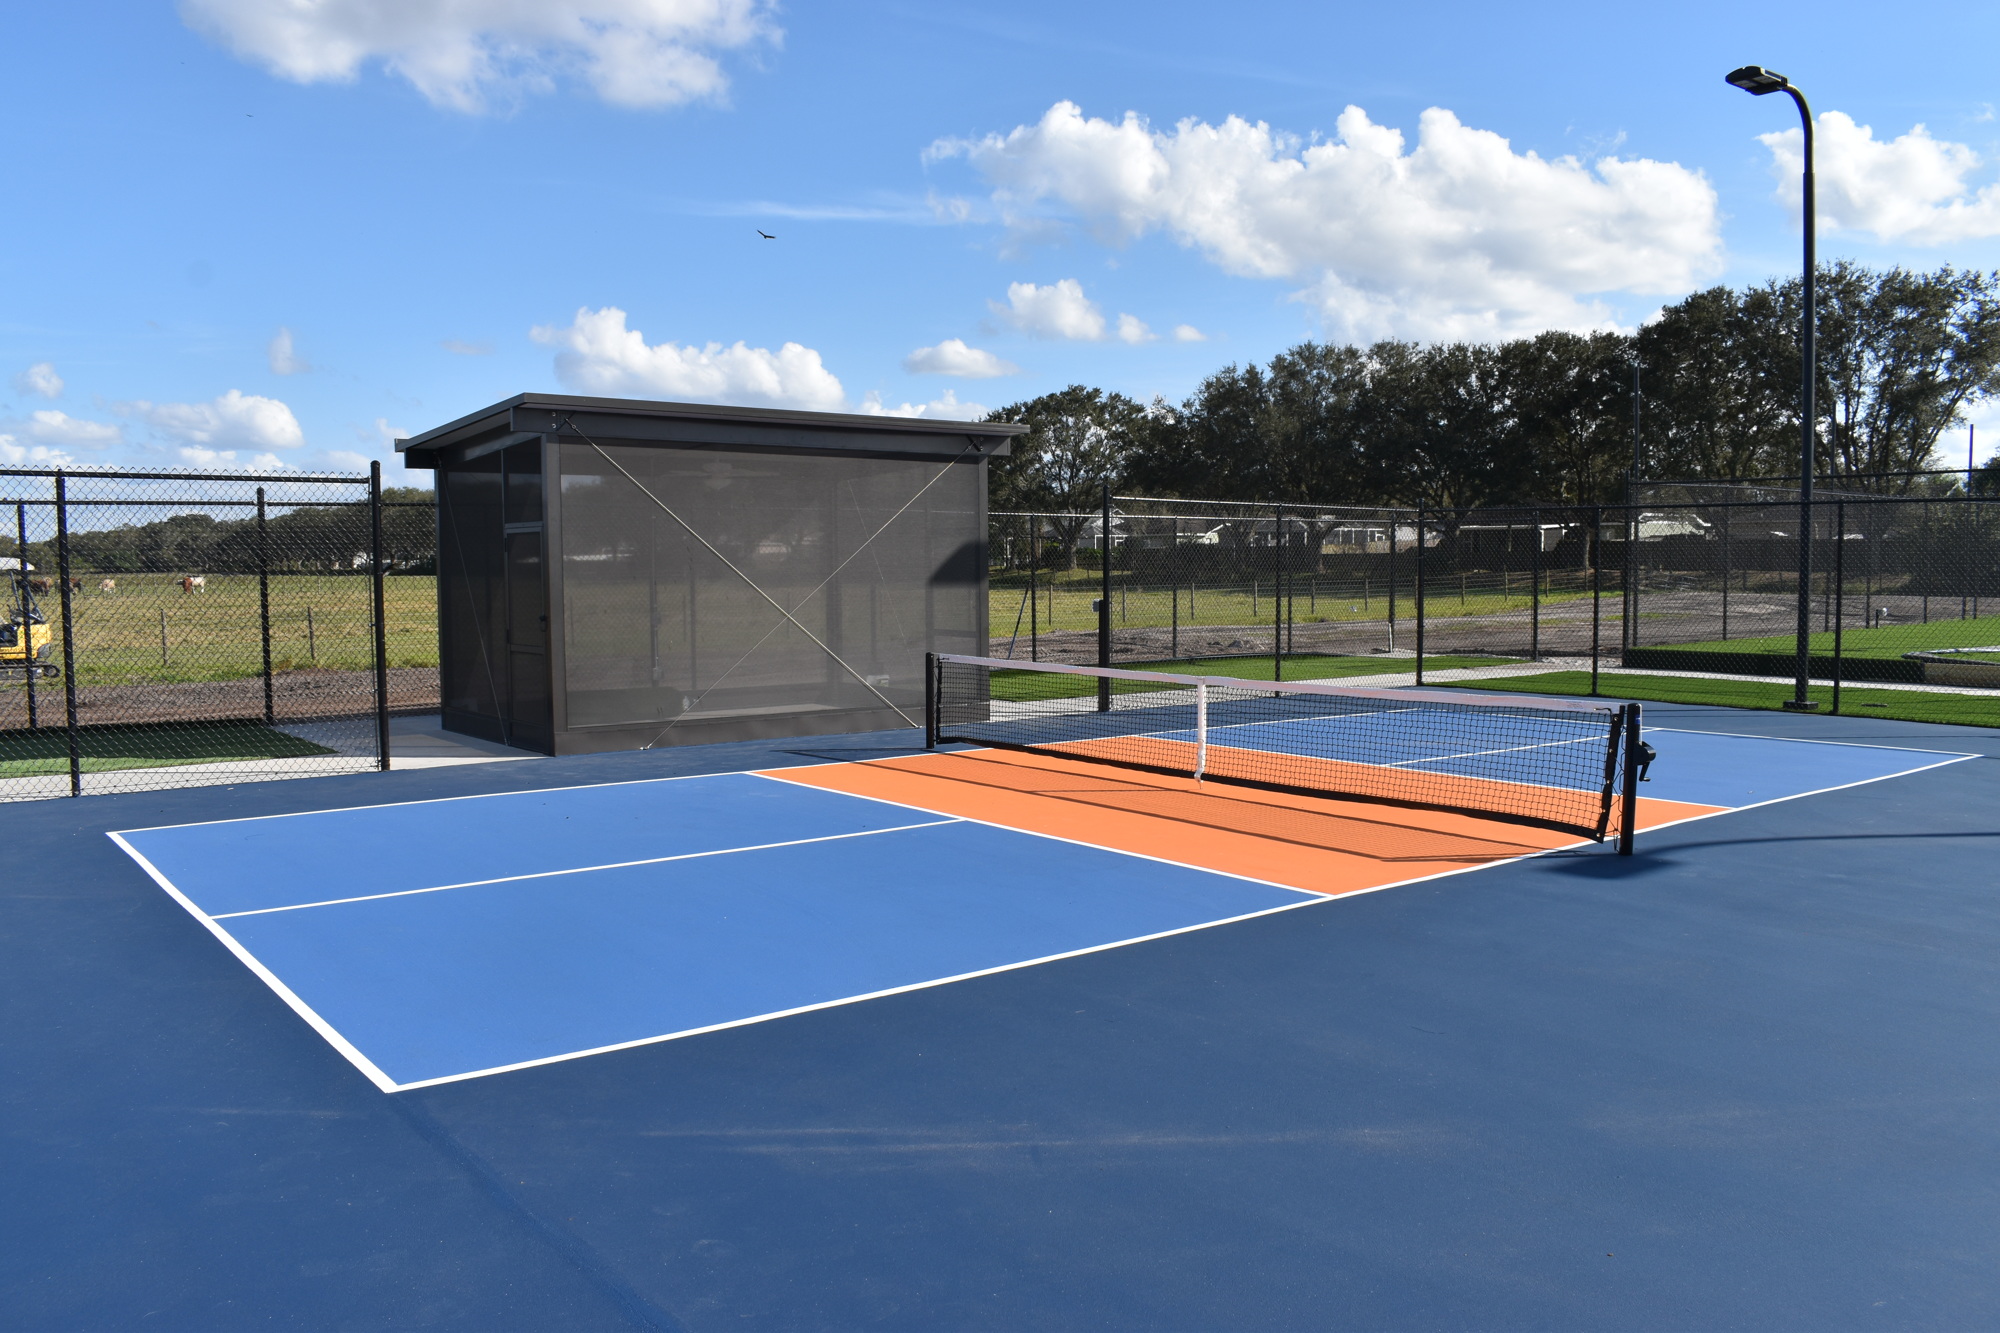 The first phase of construction of the UMR Sports complex features six pickleball courts and a screened structure that will be used as a lounge for members.